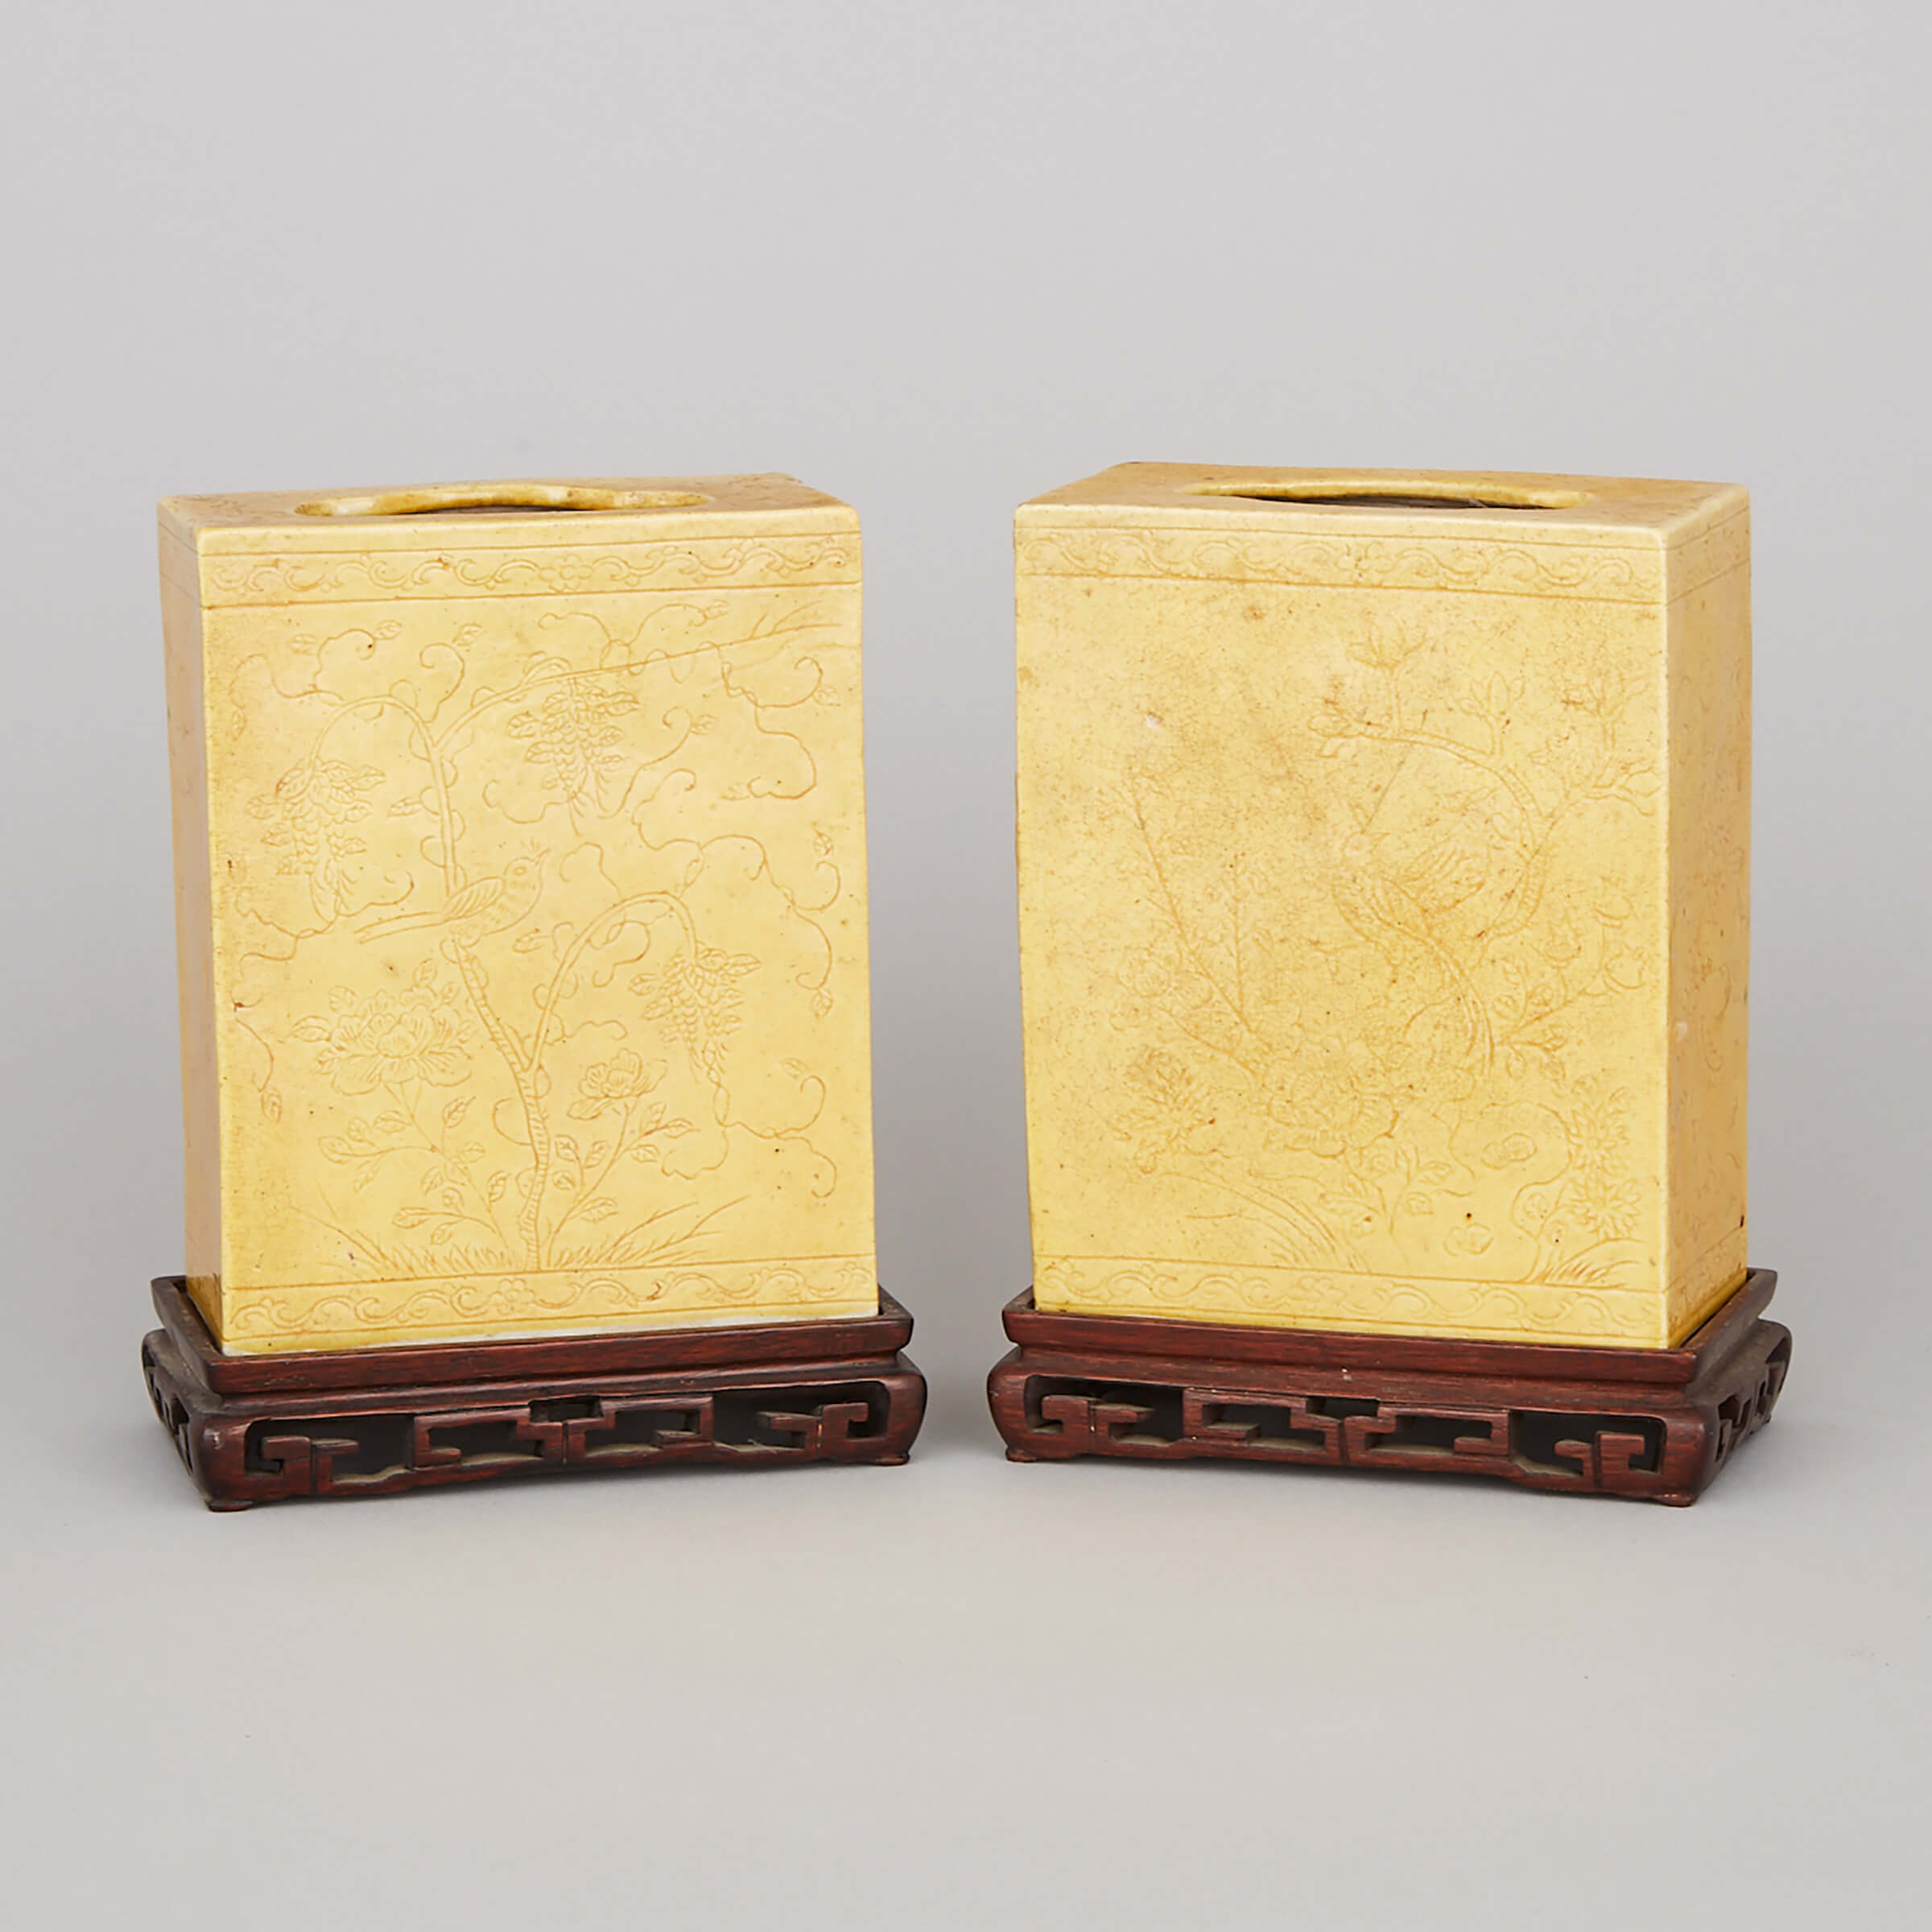 A Pair of Chinese Porcelain Pillows, 19th Century